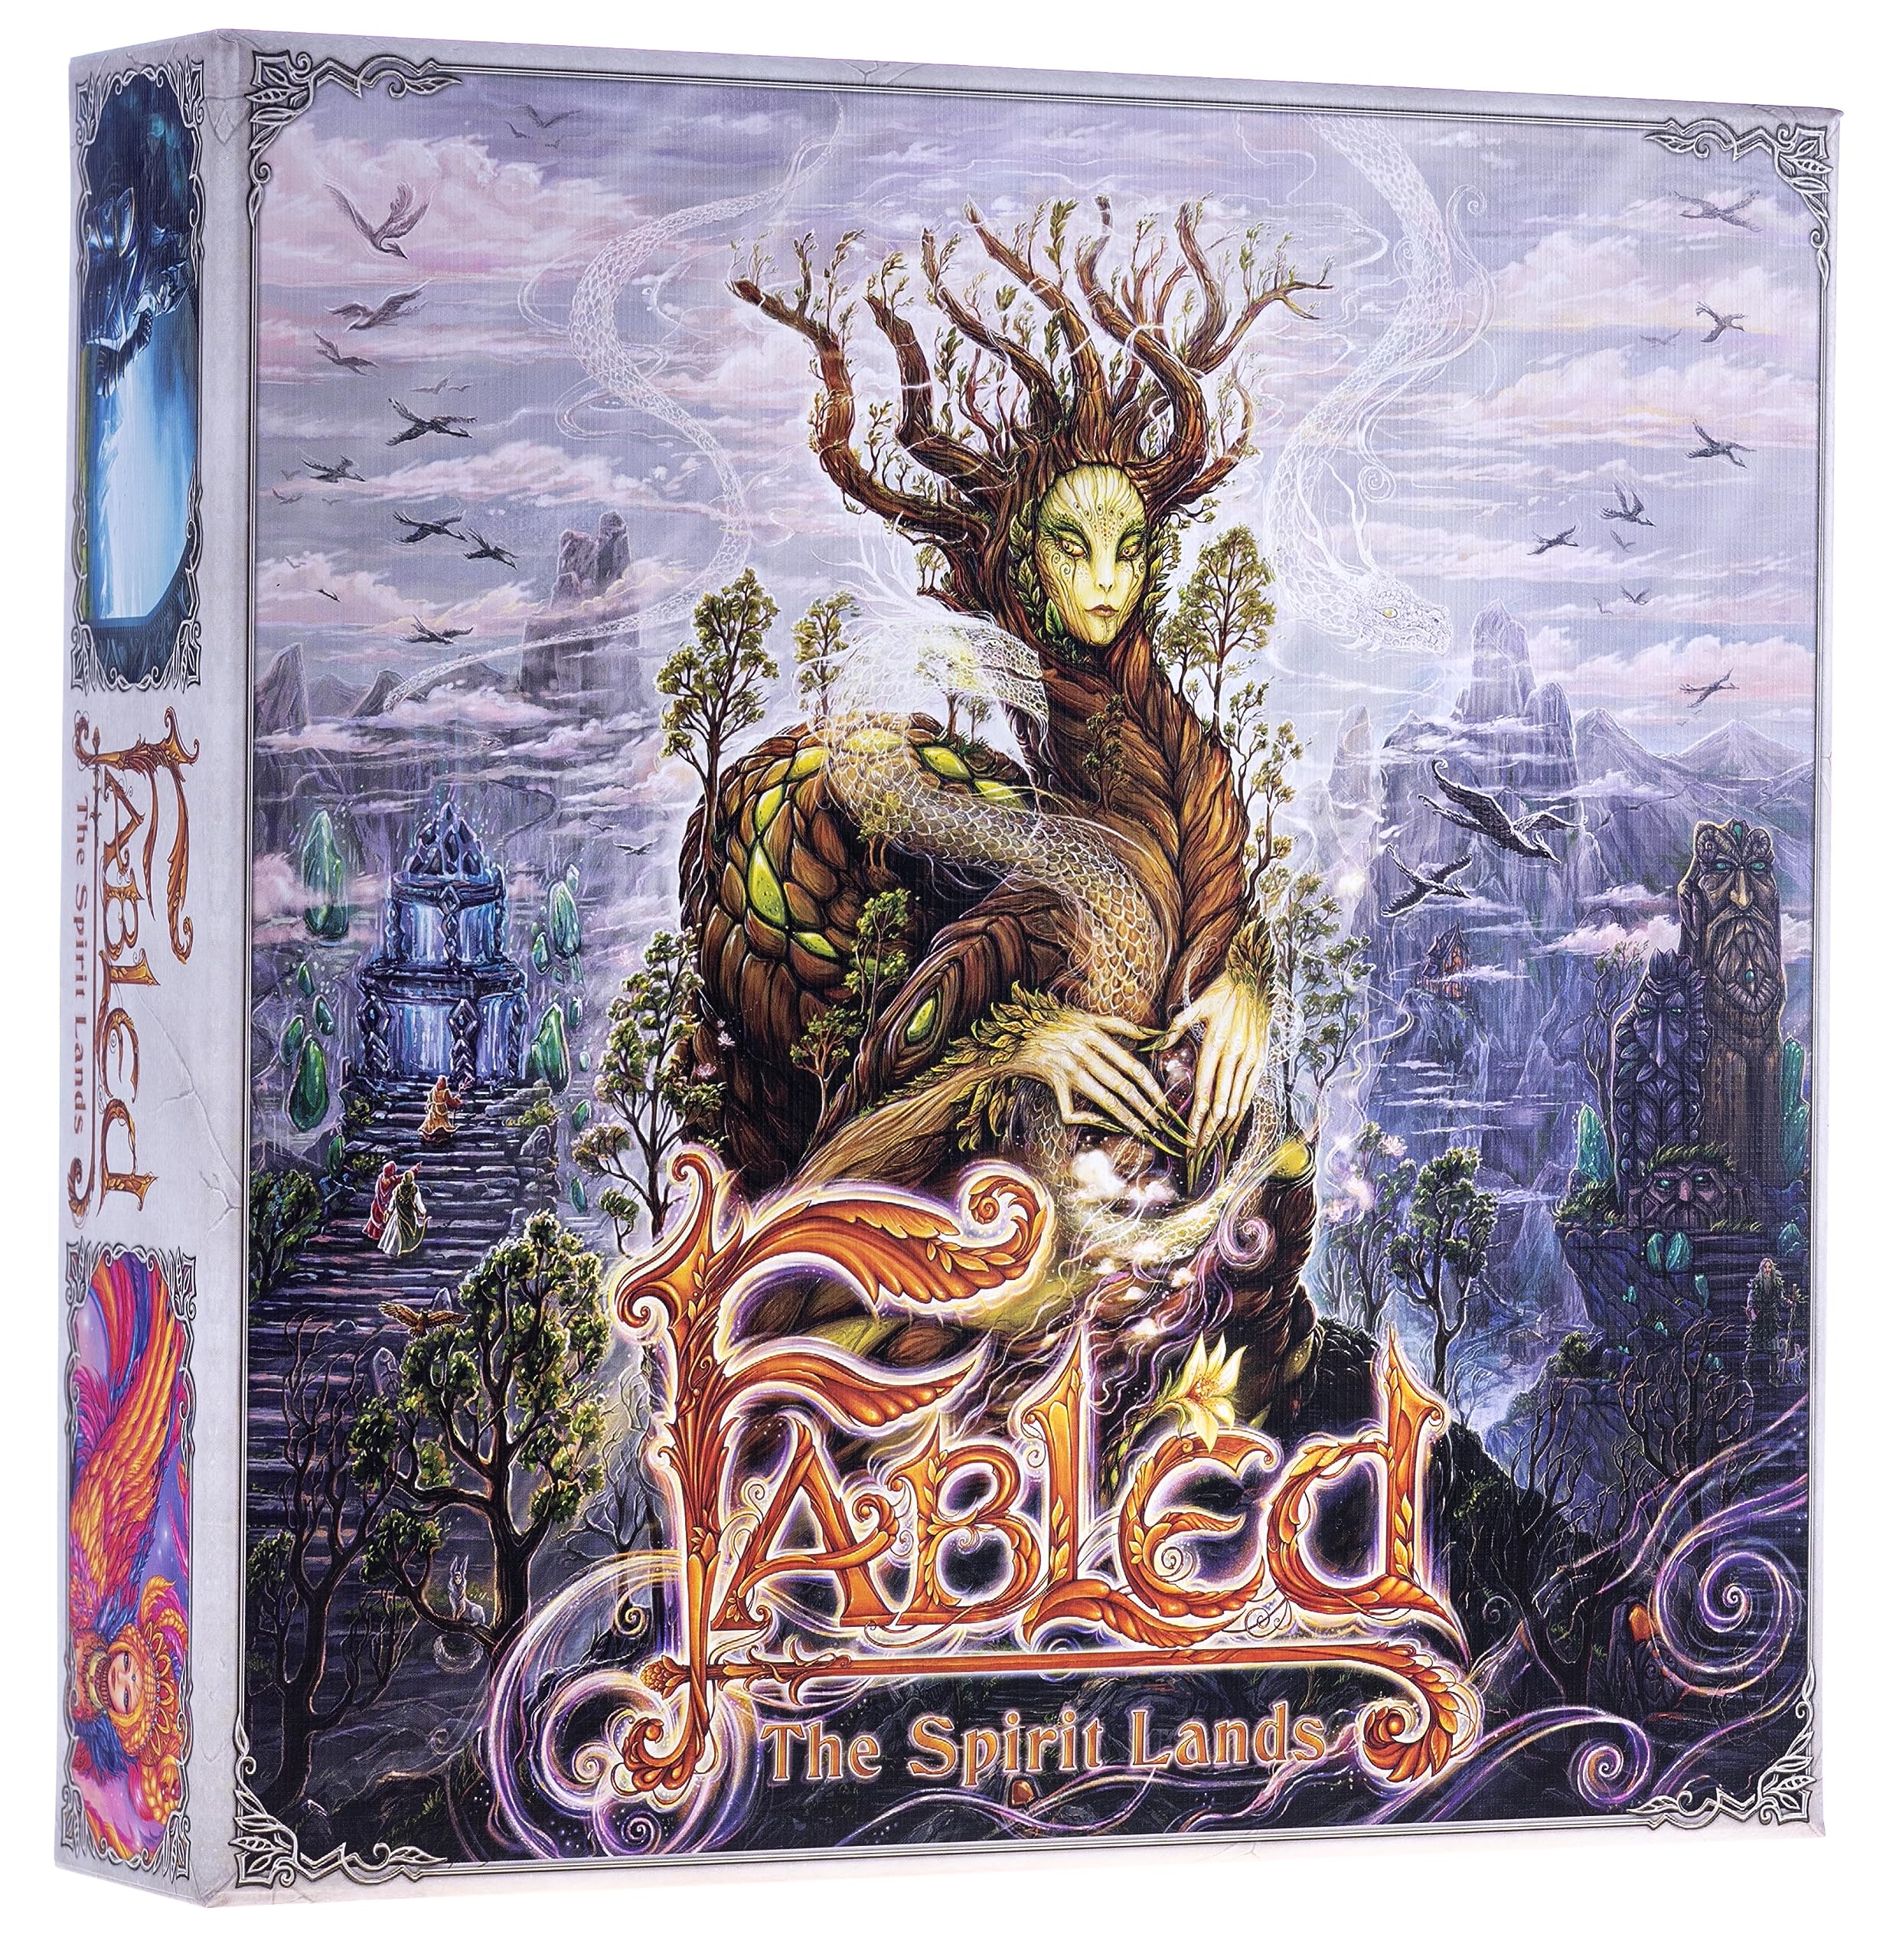 Fabled: The Spirit Lands | 1-5 Players | Ages 14 and up | Fantasy | Strategy | Average Playtime 40-75 min